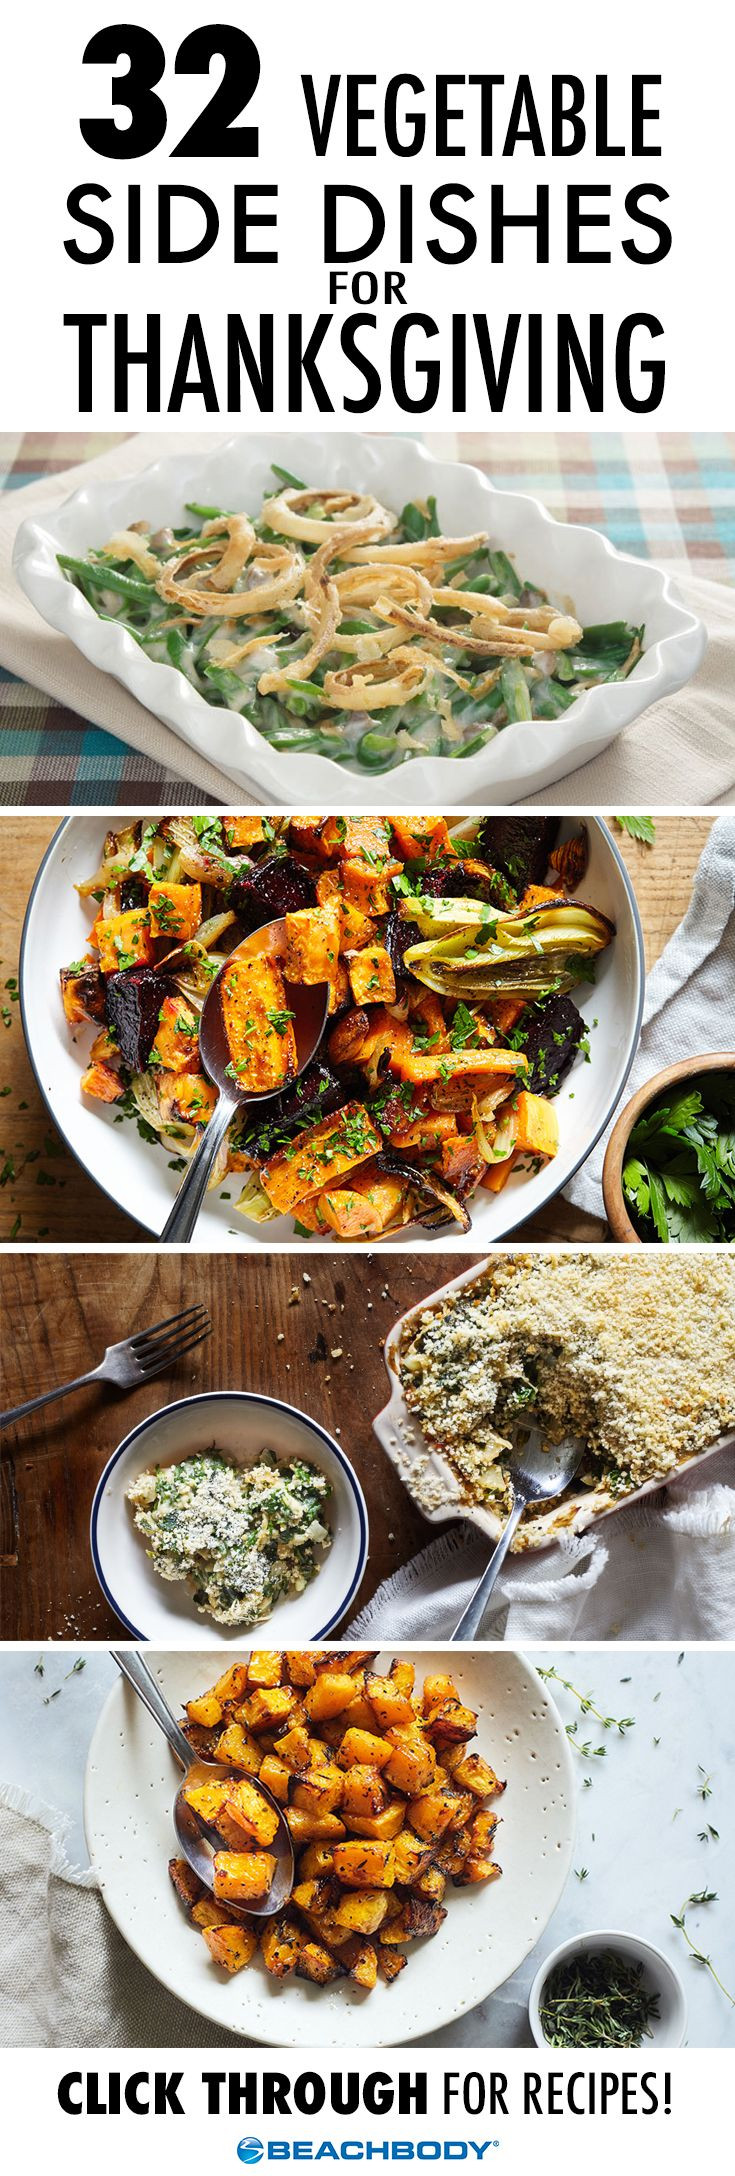 Vegetarian Sides For Thanksgiving
 837 best images about Healthy Recipes on Pinterest